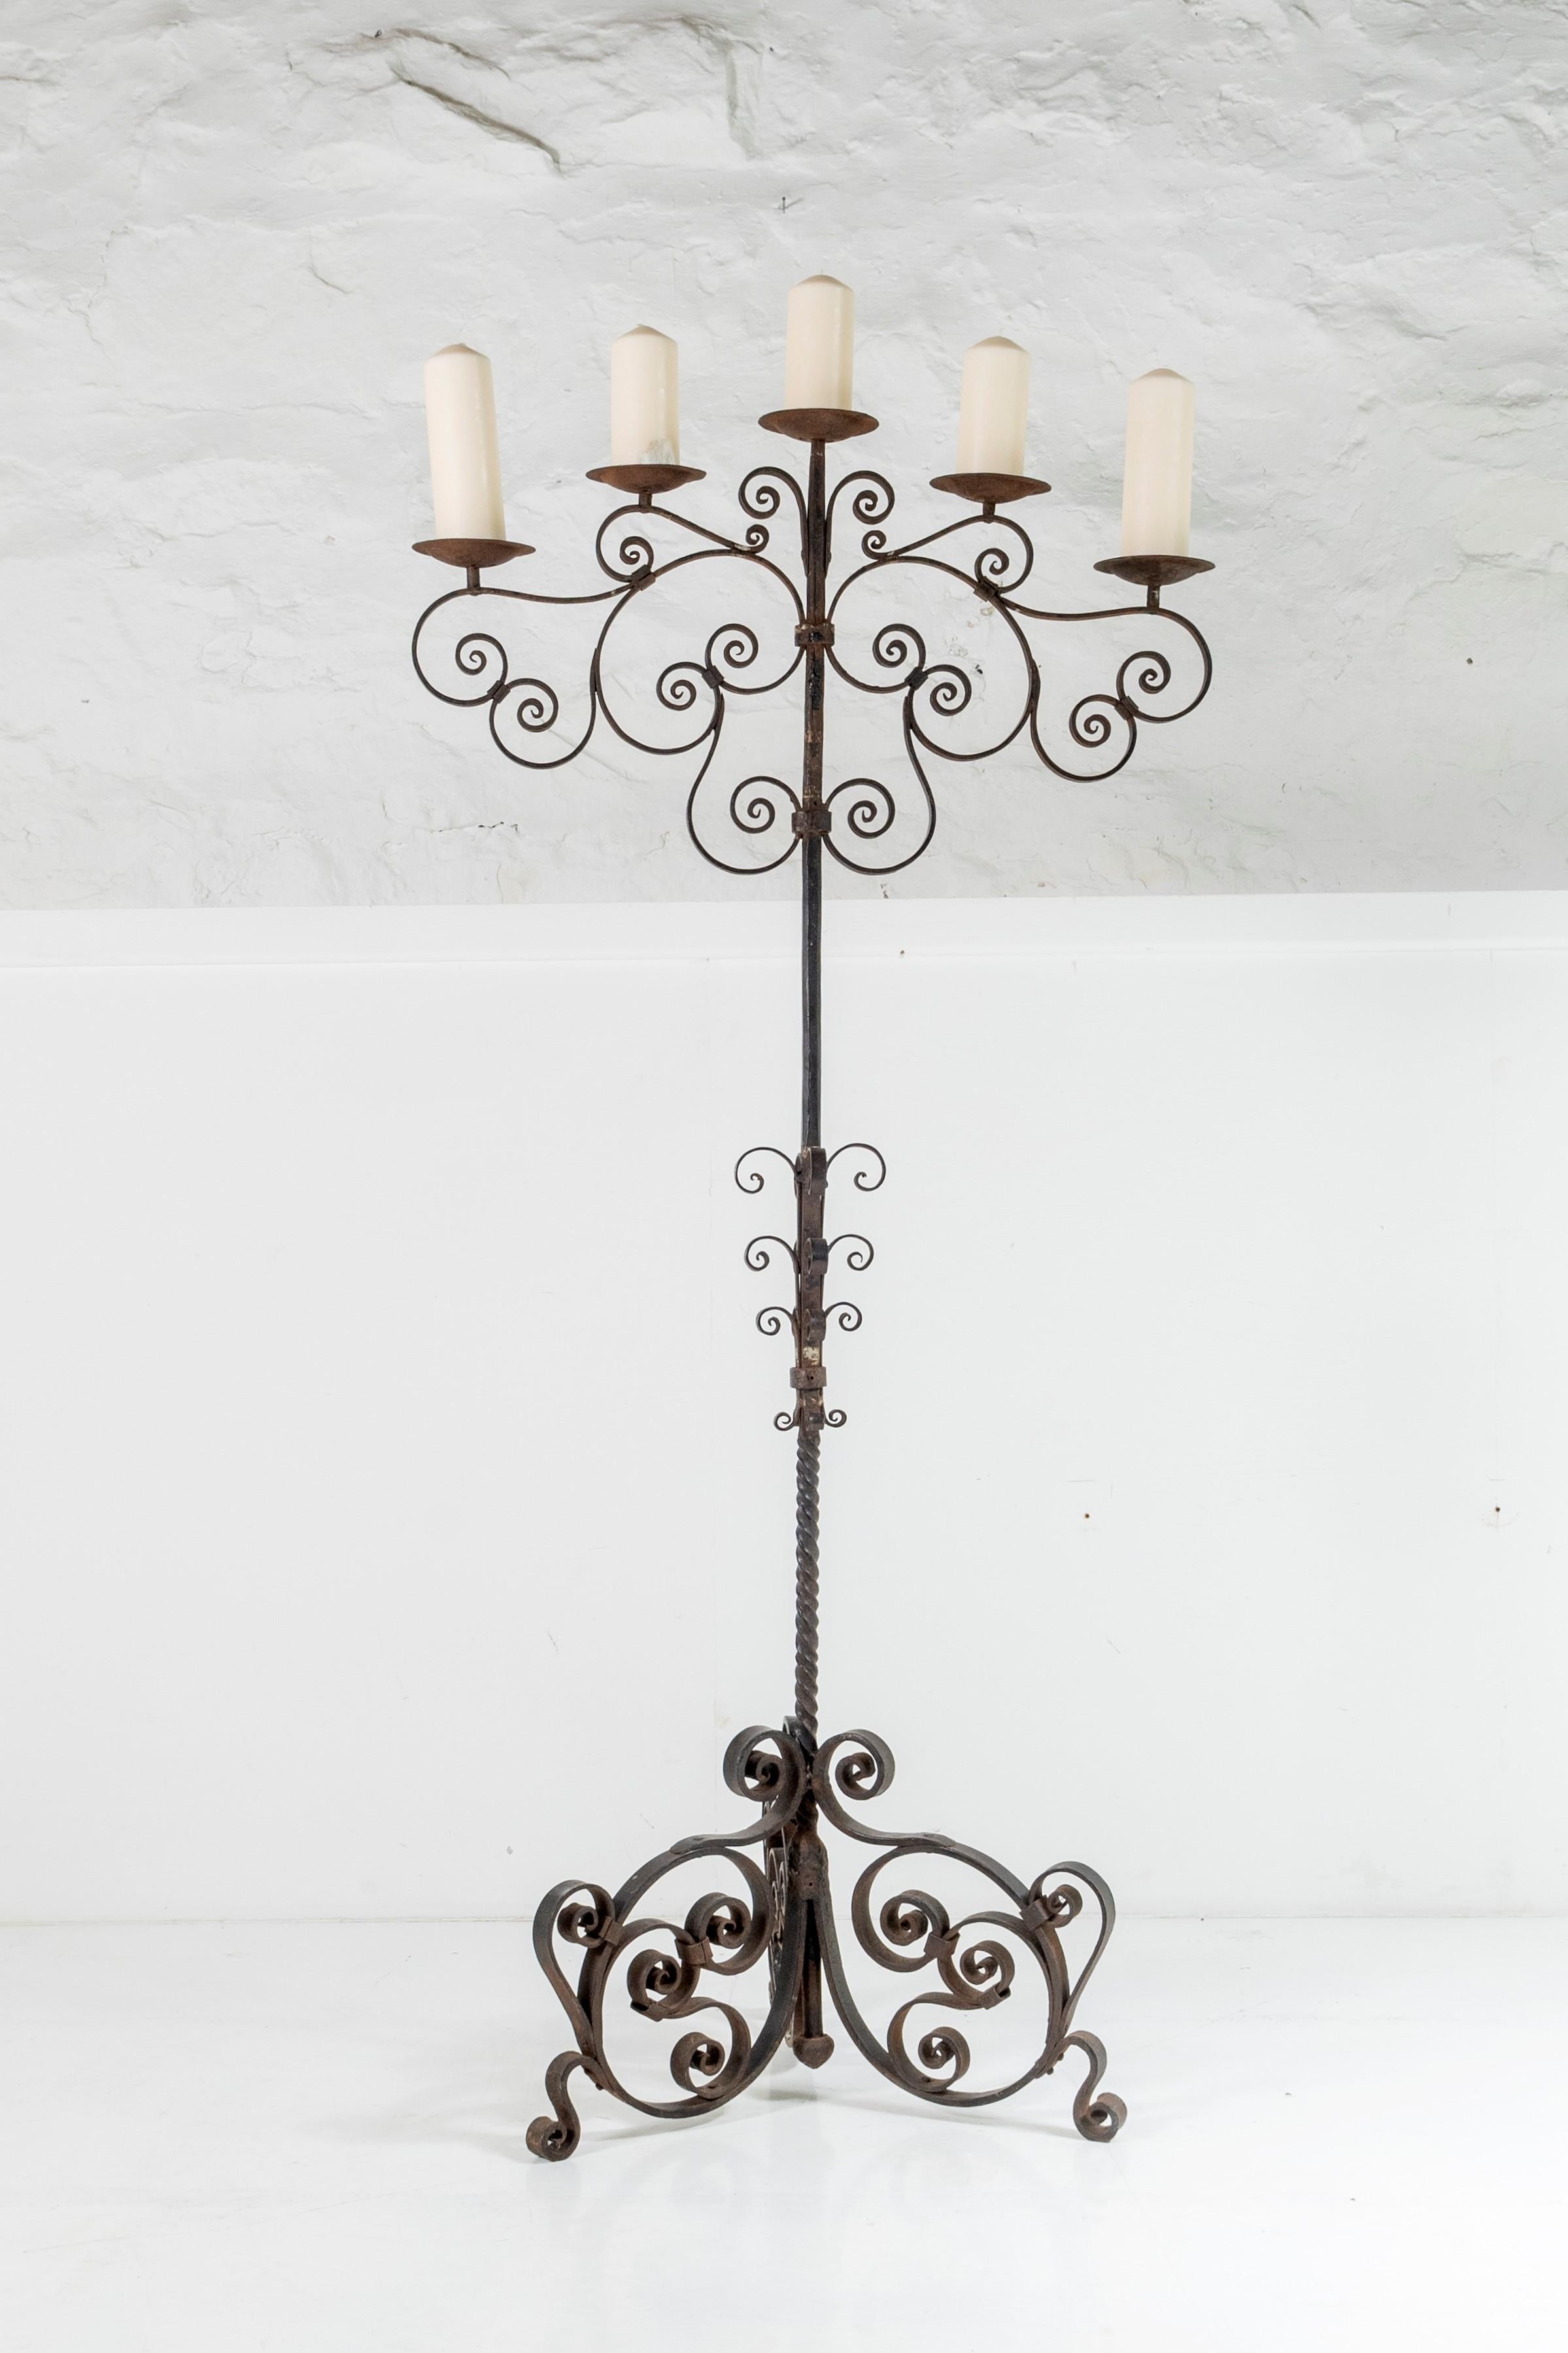 A wonderful 19th century wrought iron candelabra, heavy form blacksmith made with lovely scroll details. The 5 arm candle tree is almost 3ft across, each candle holder is 4.75 diameter.
Circa 1890, this is a wonderful estate made piece of the